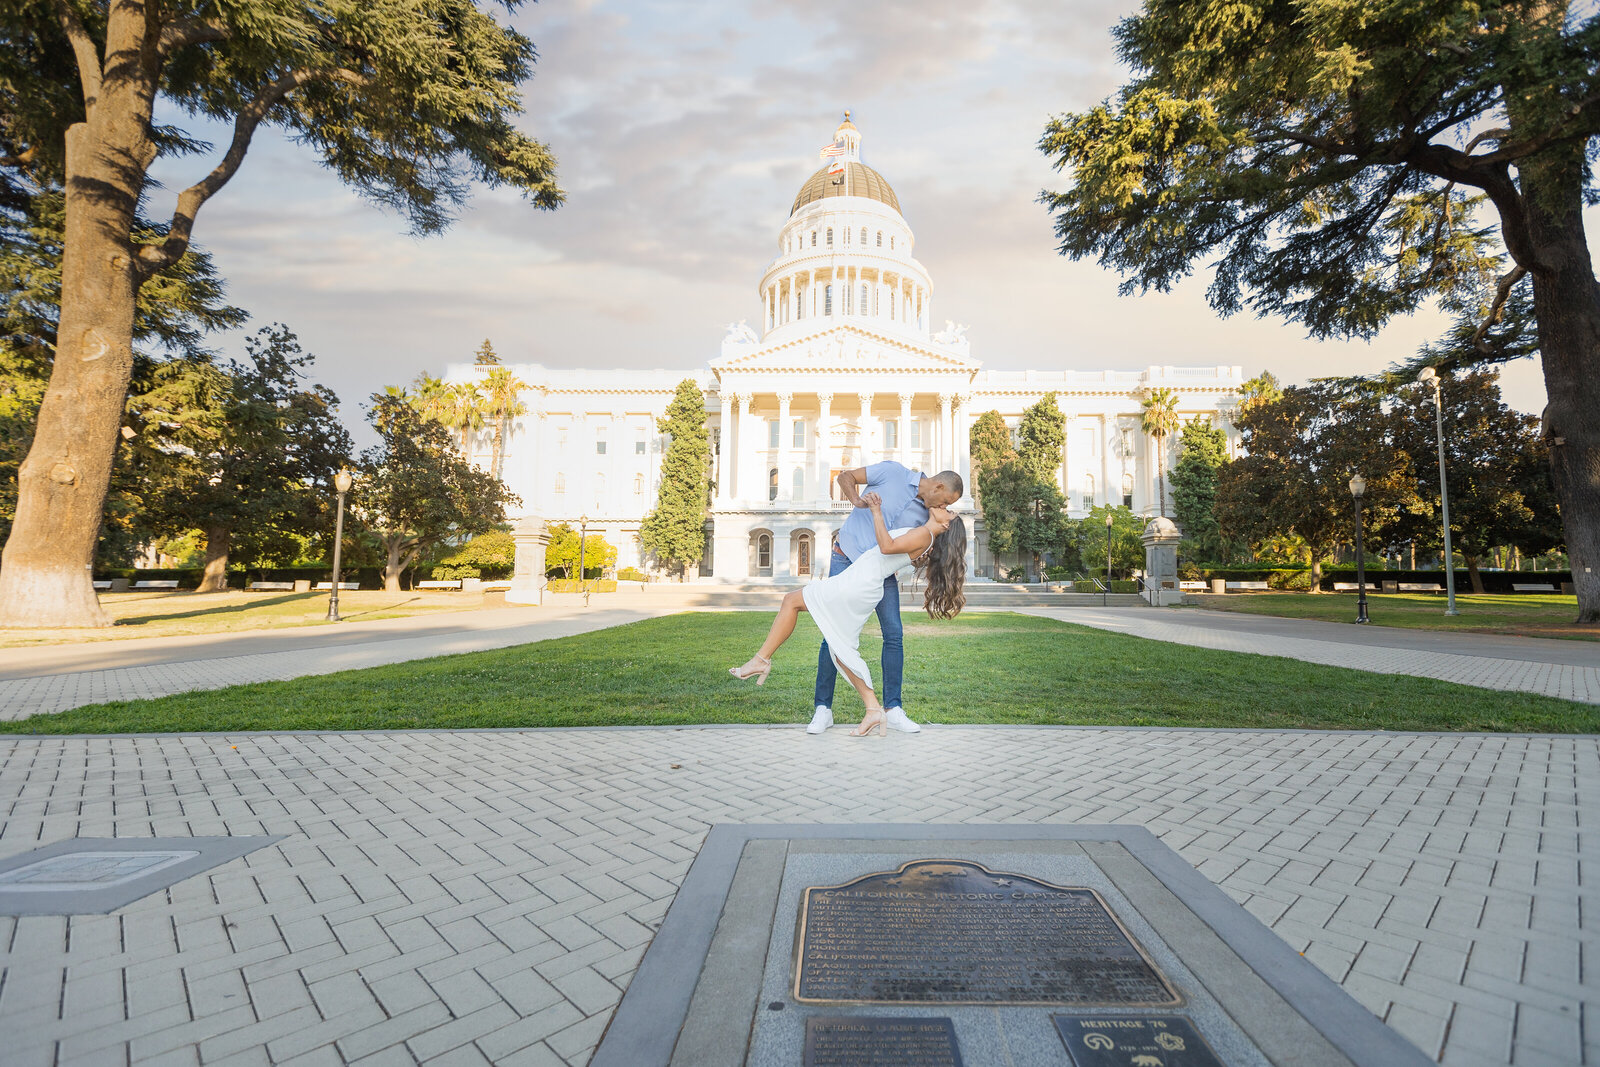 engagement photo in front of sacramento capitol building with engaged couple dipping for a kiss. photo be wedding photographer sacramento, philippe studio pro